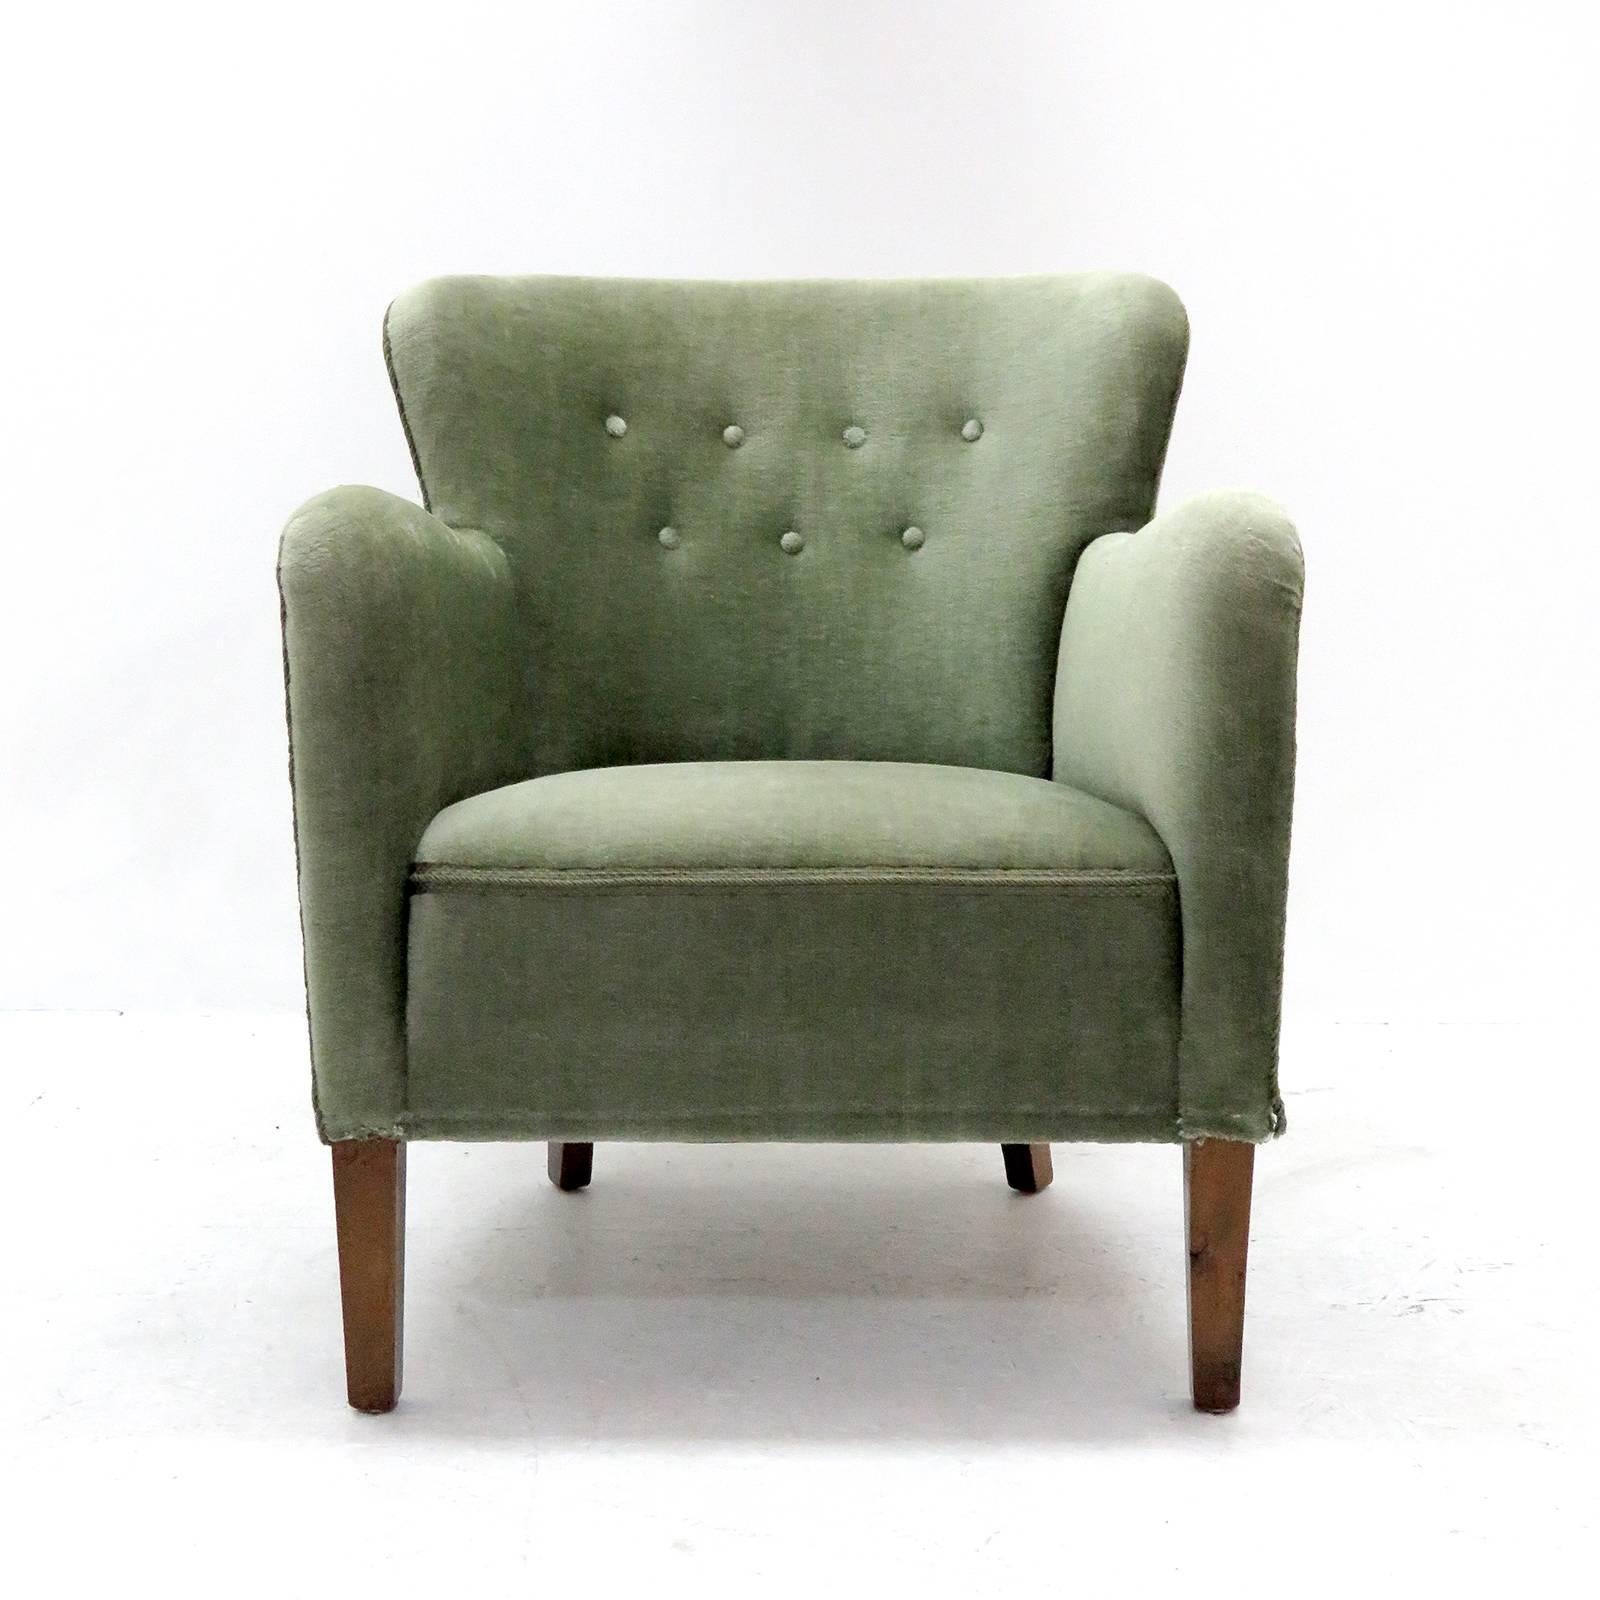 Wonderful Dansk Mobler club chair in style of Fritz Hansen easy chairs 1669 with original grey-green mohair upholstery and teak legs.